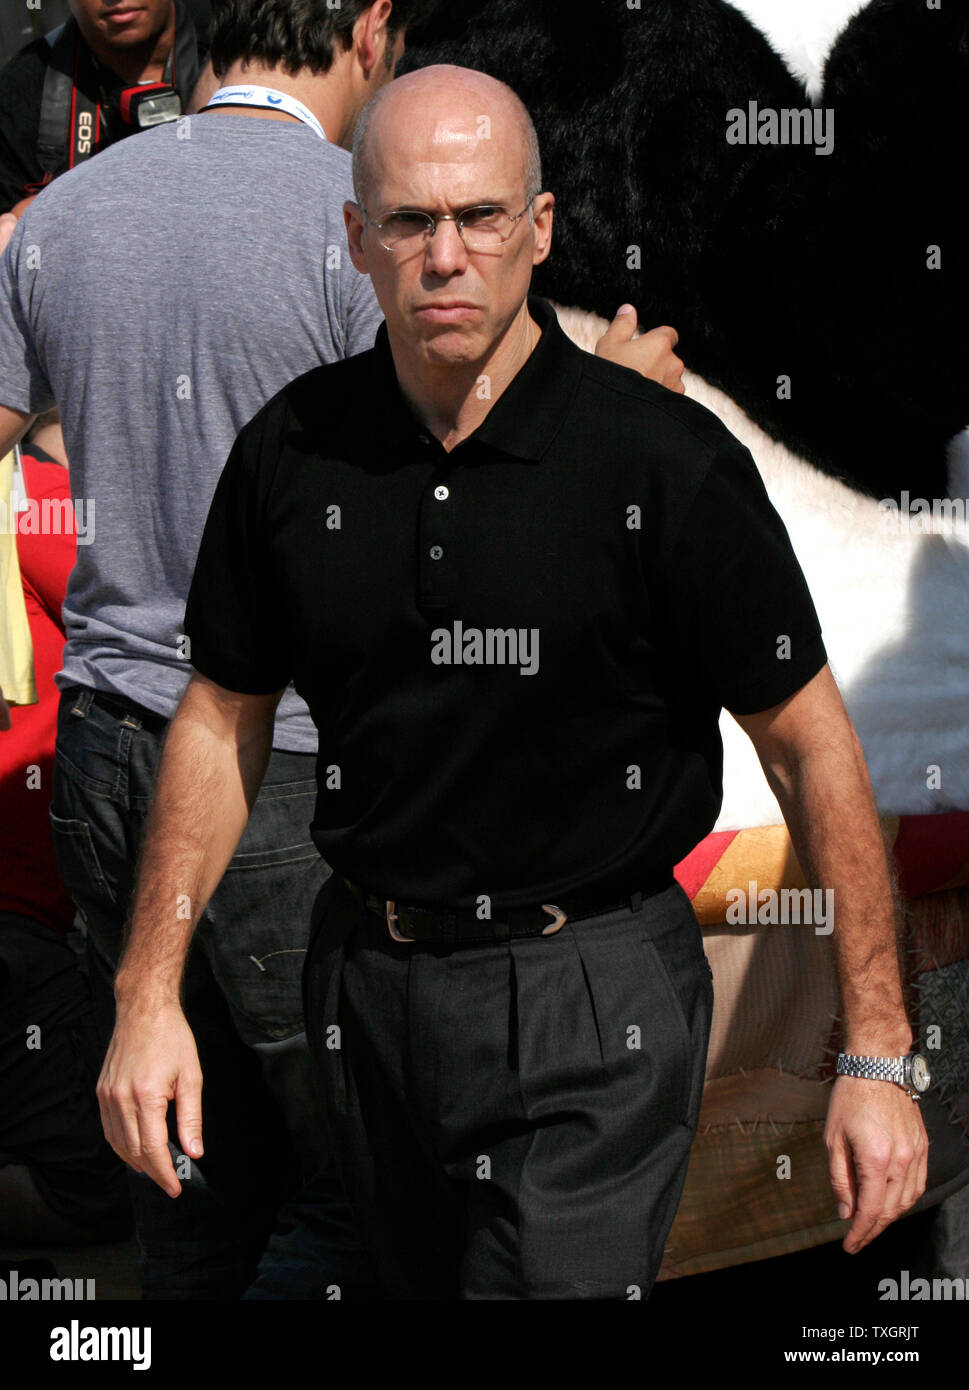 DreamWorks Animation SKG CEO Jeffrey Katzenberg arrives at an event promoting the film 'Kung Fu Panda' the day before its worldwide premiere at the 61st Annual Cannes Film Festival in Cannes, France on May 14, 2008.   (UPI Photo/David Silpa) Stock Photo